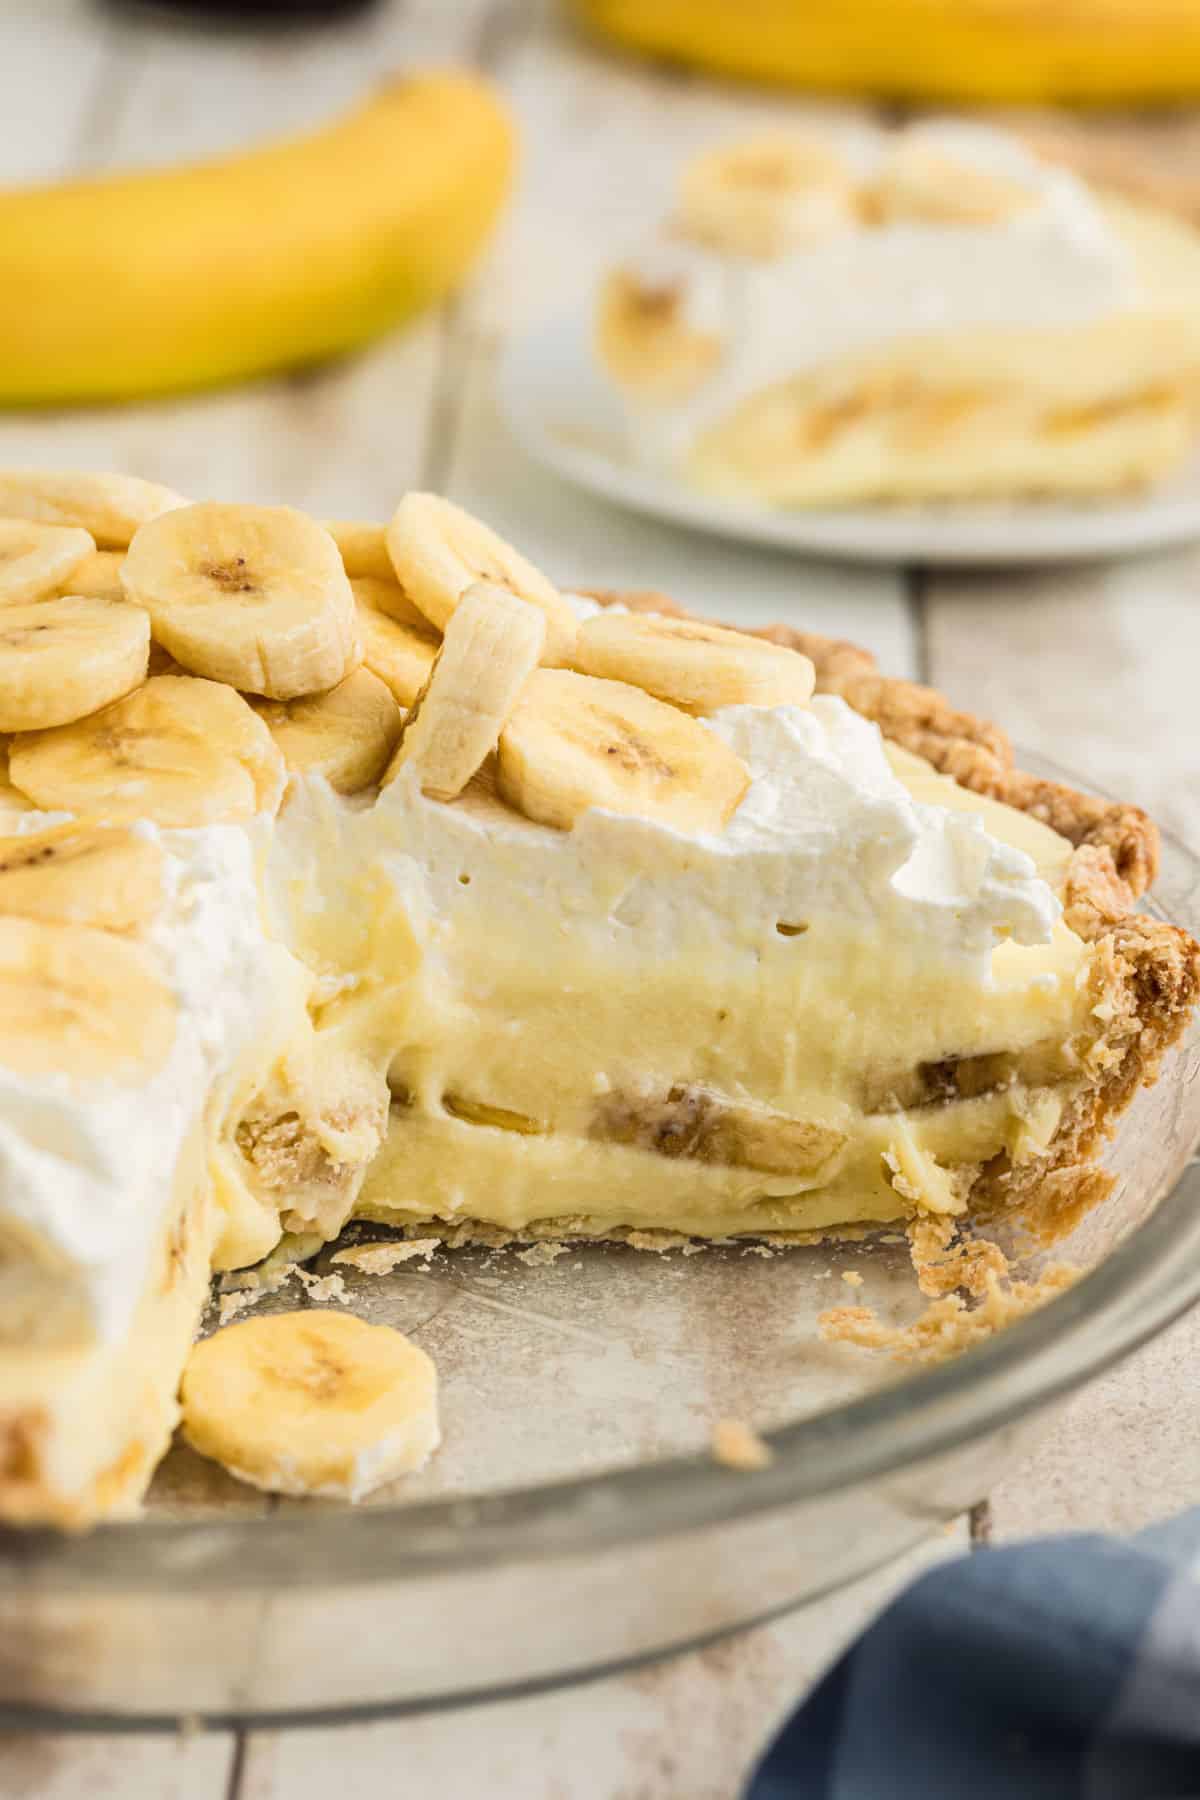 A dish full of banana cream pie with some slices missing.